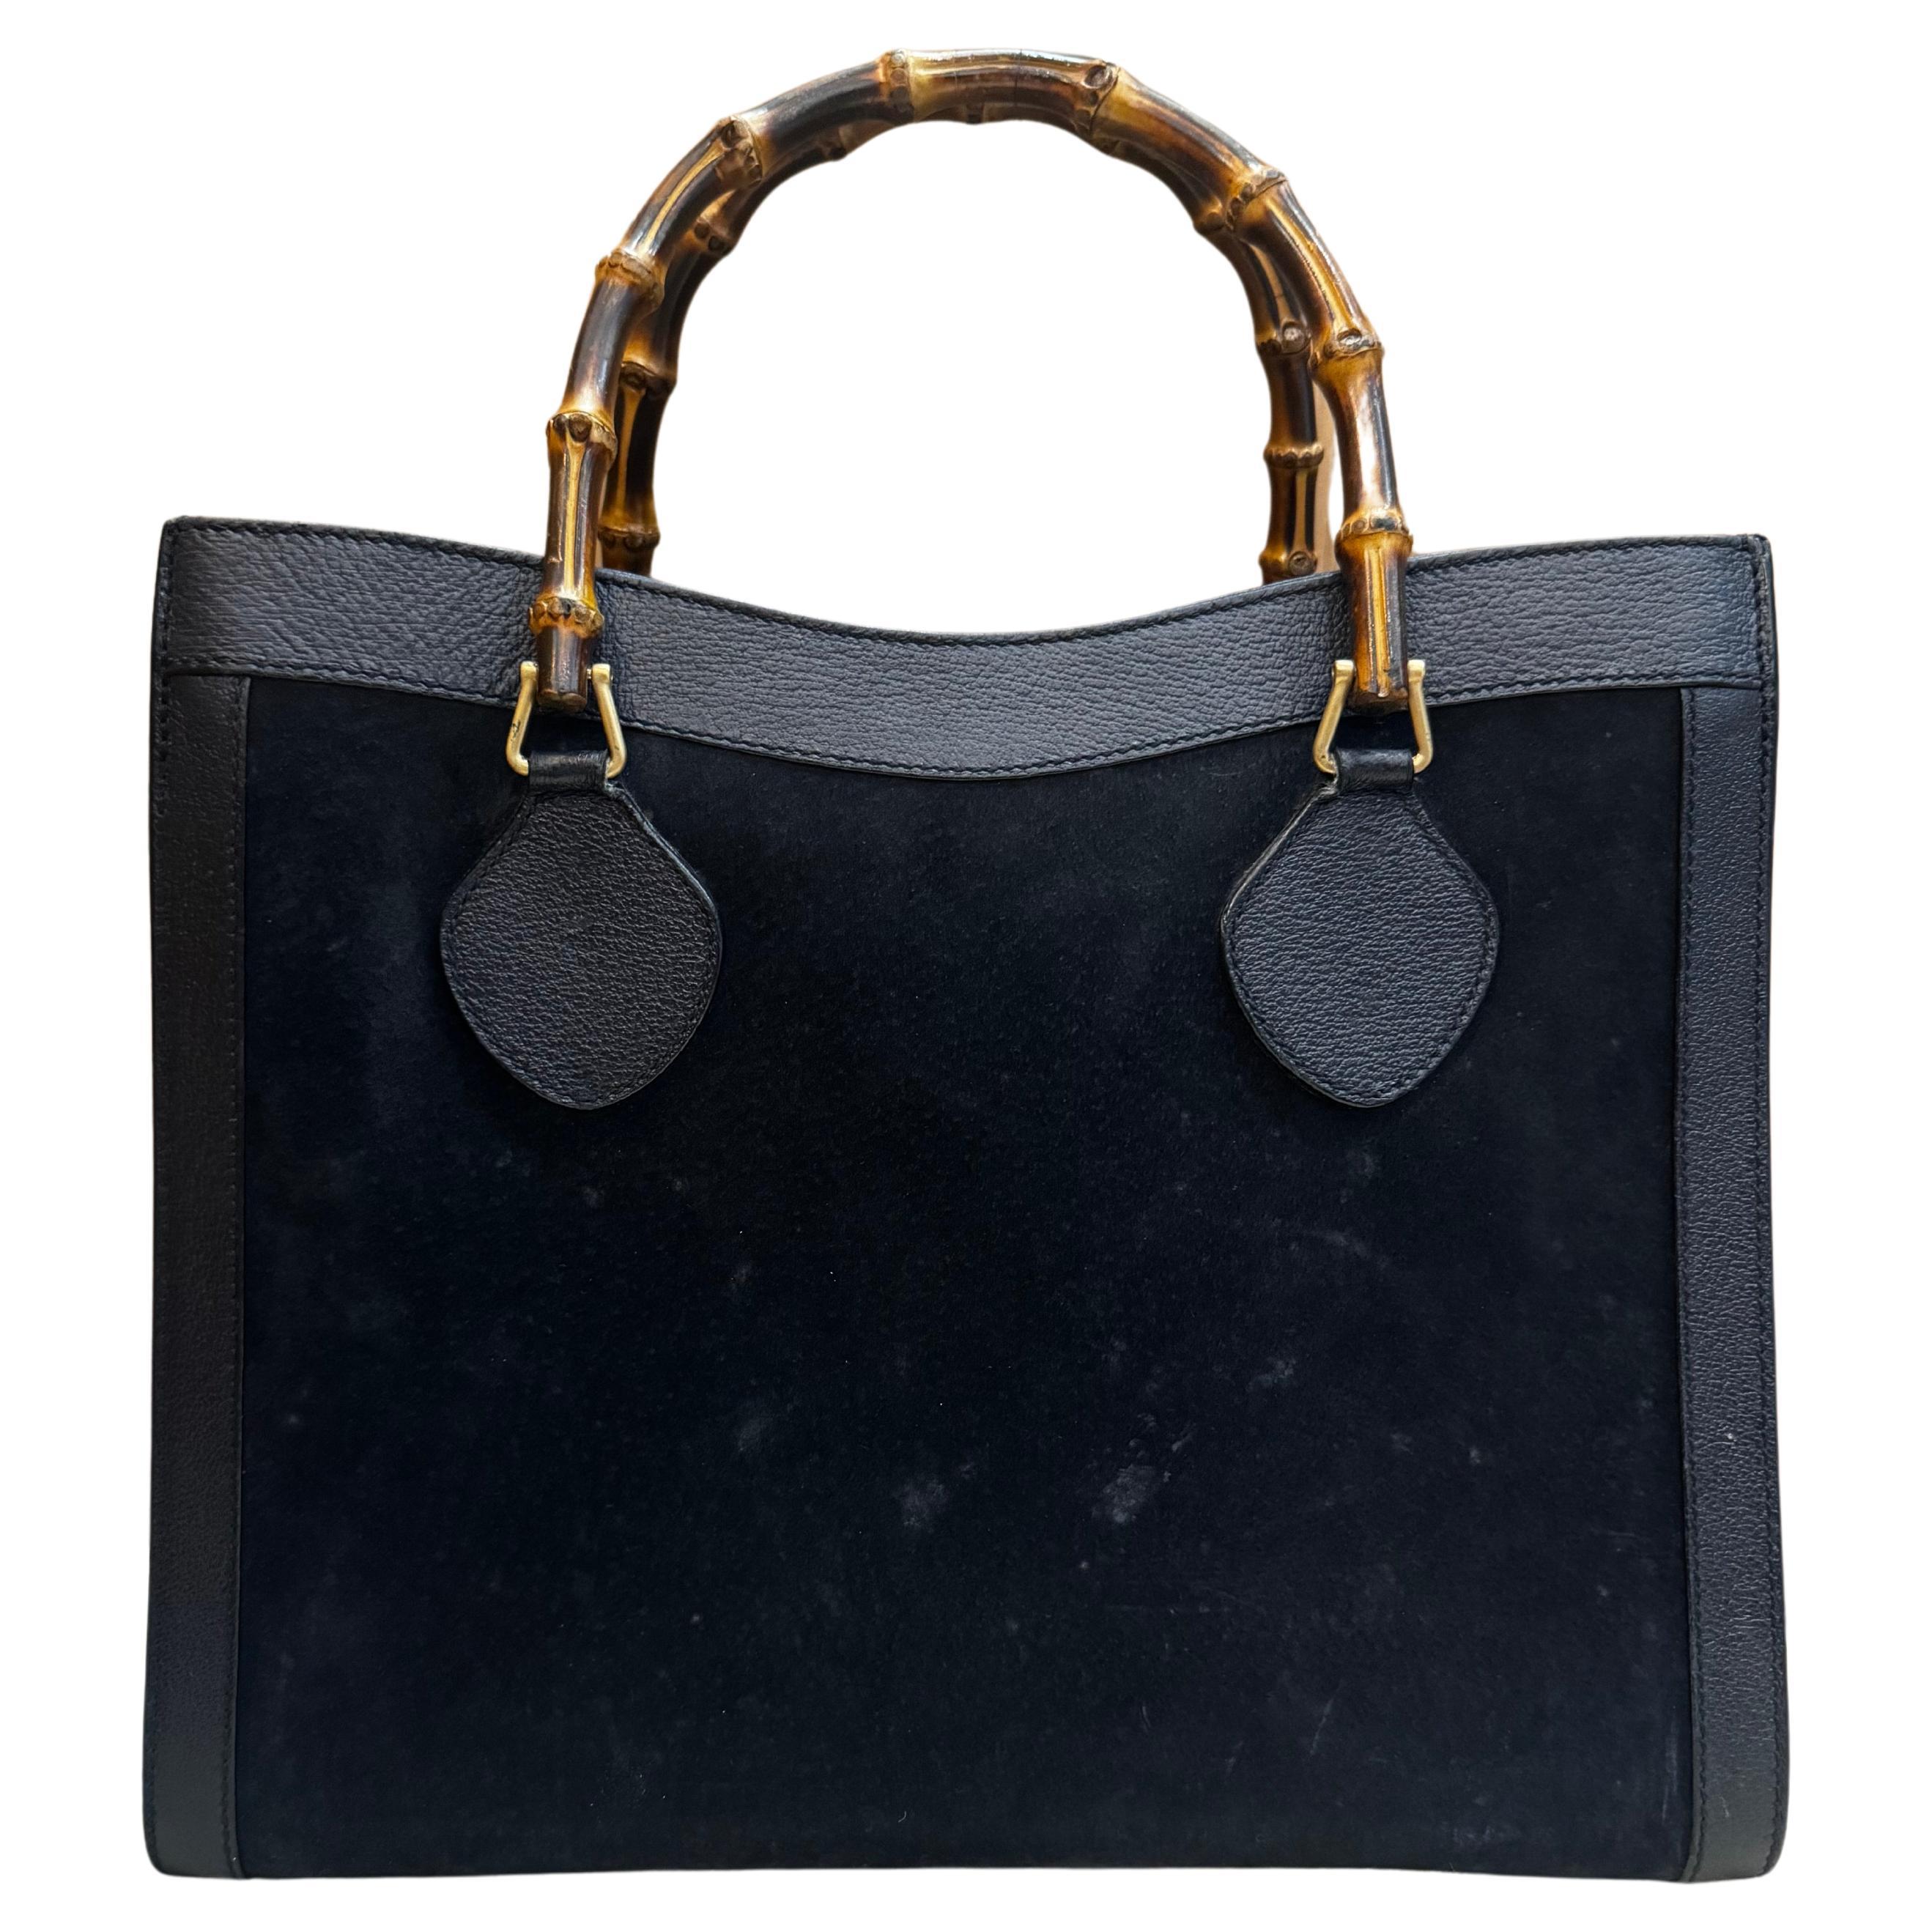 Vintage GUCCI Diana Tote Bamboo Tote Bag Nubuck Leather Navy (Medium) For Sale